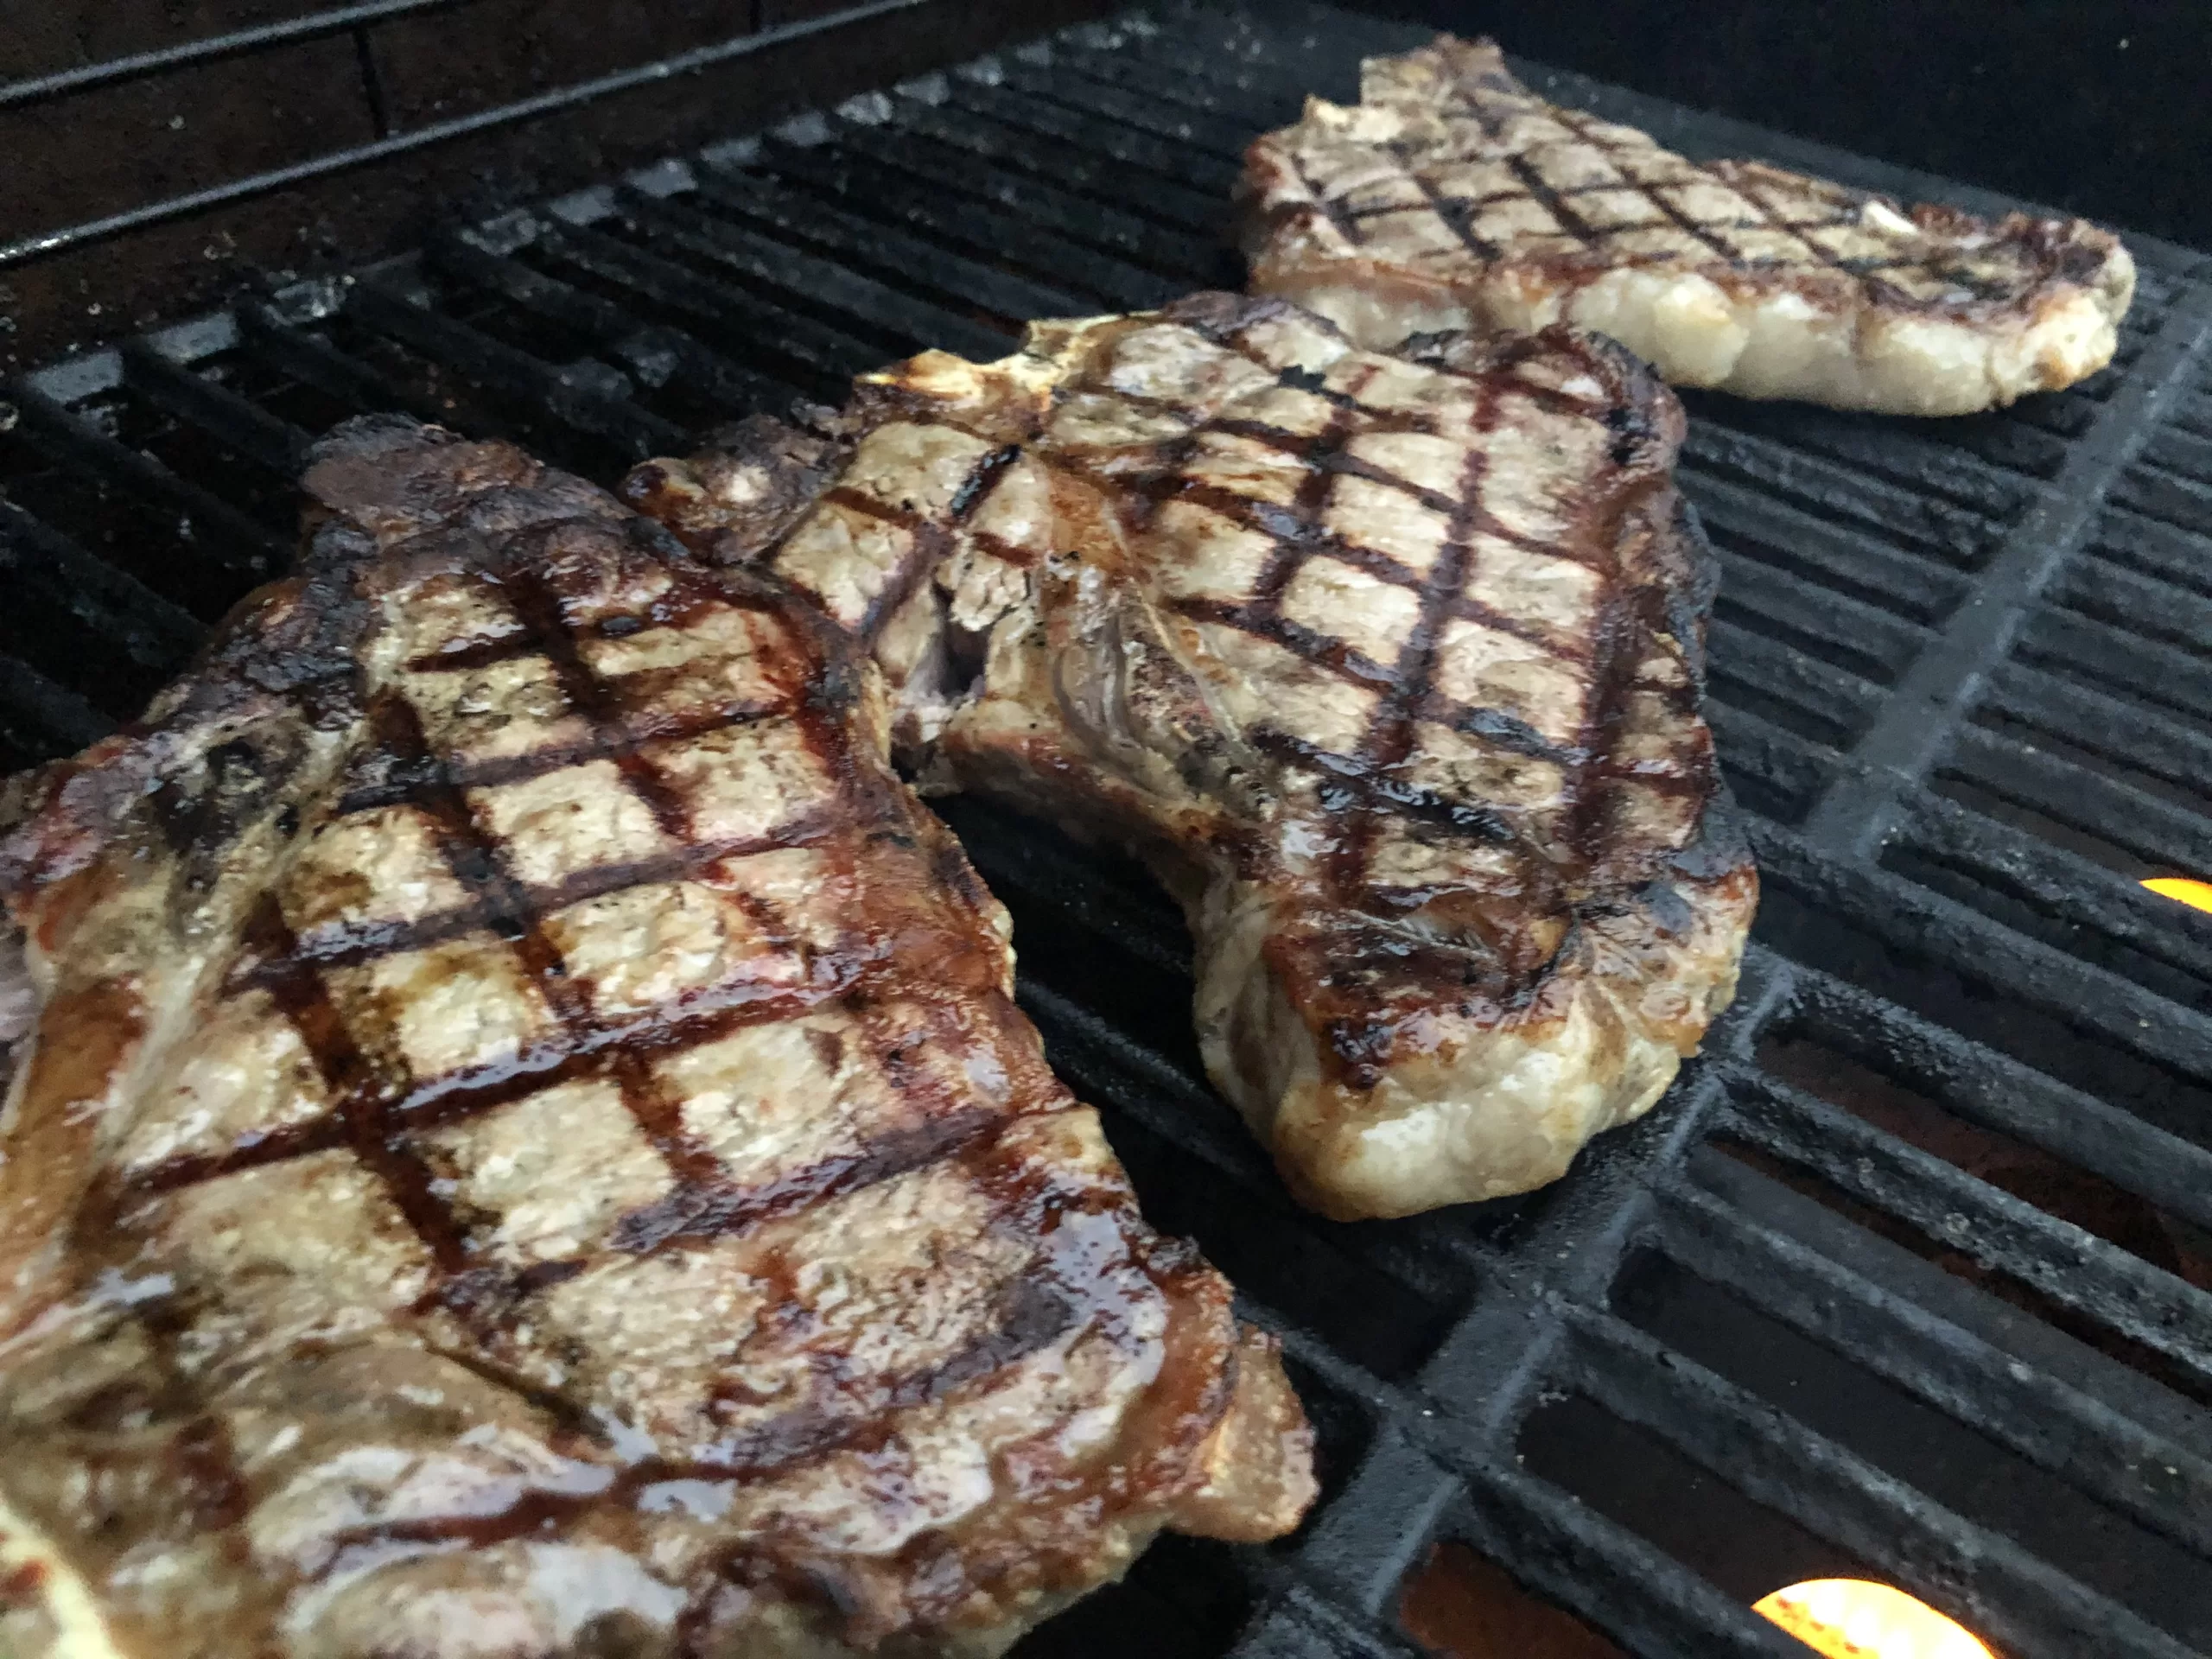 Steaks on the grill at night